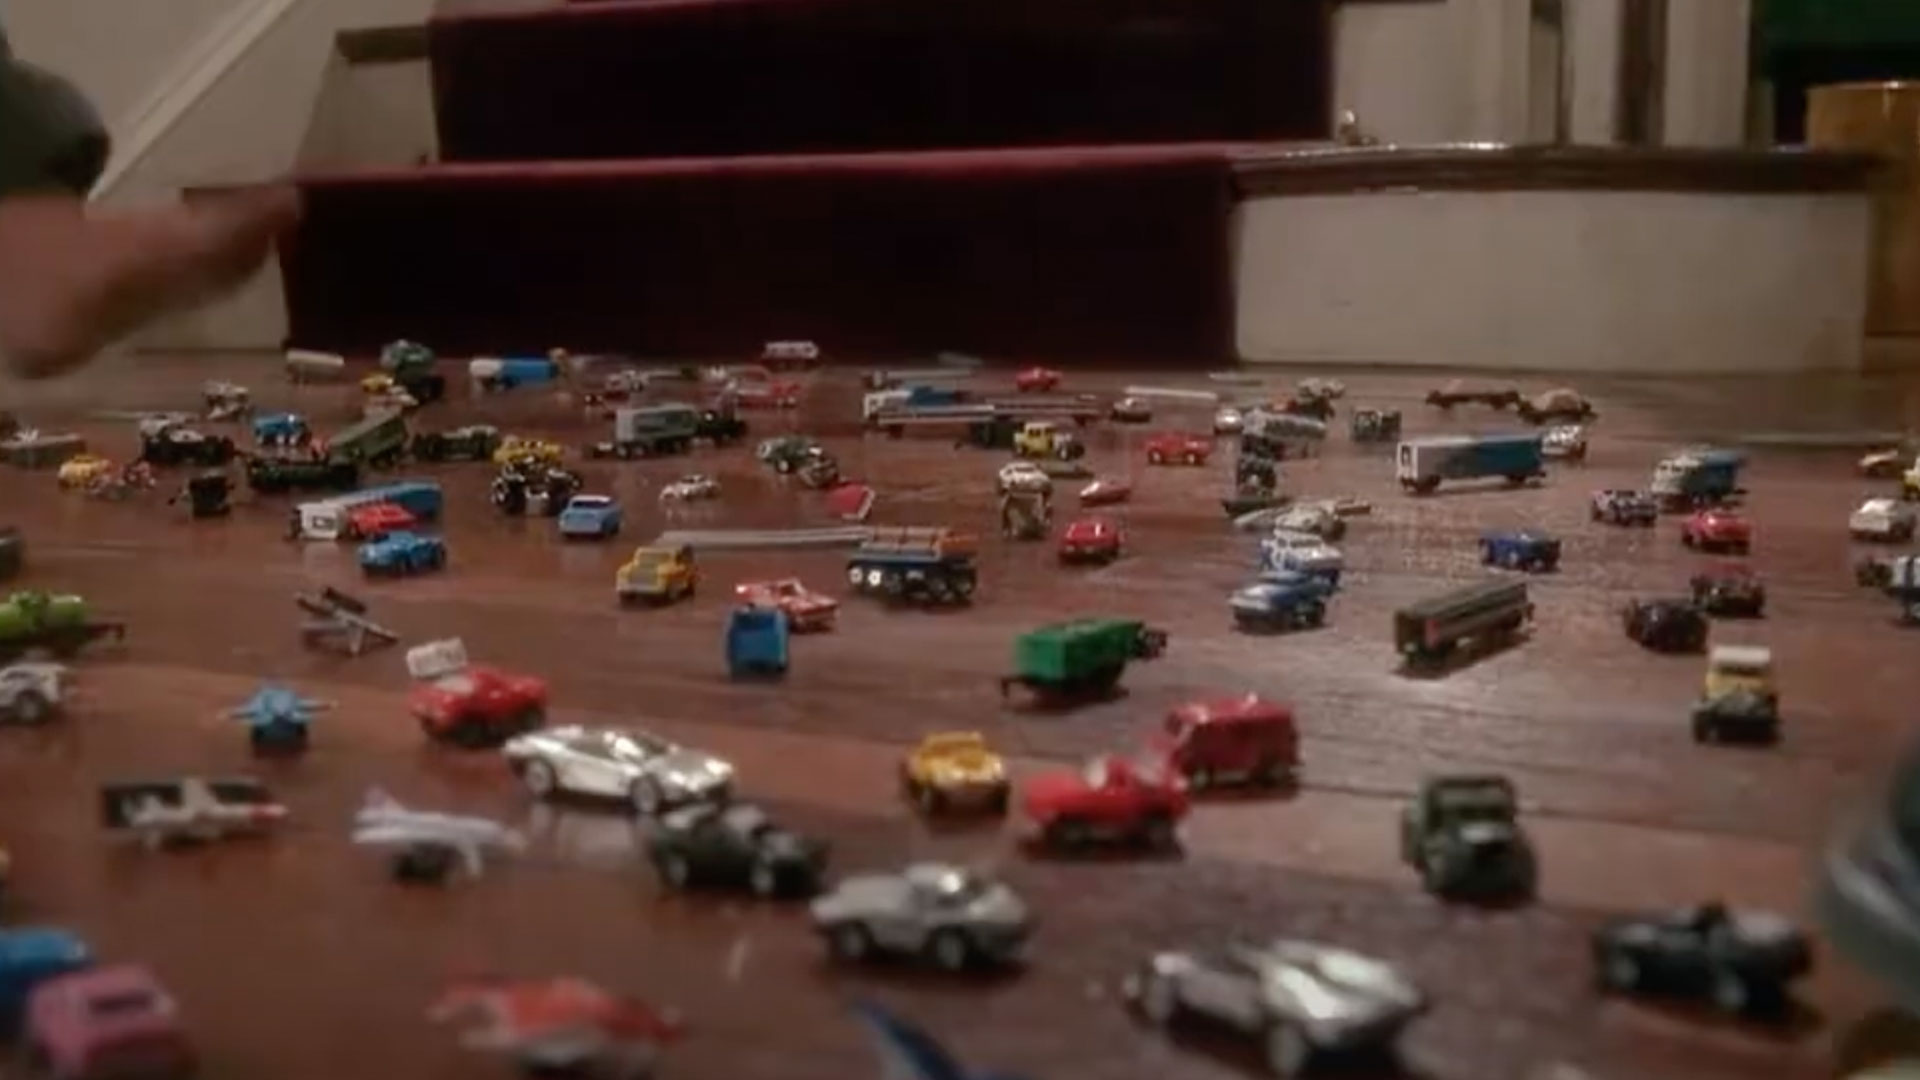 A floor covered in Micromachines